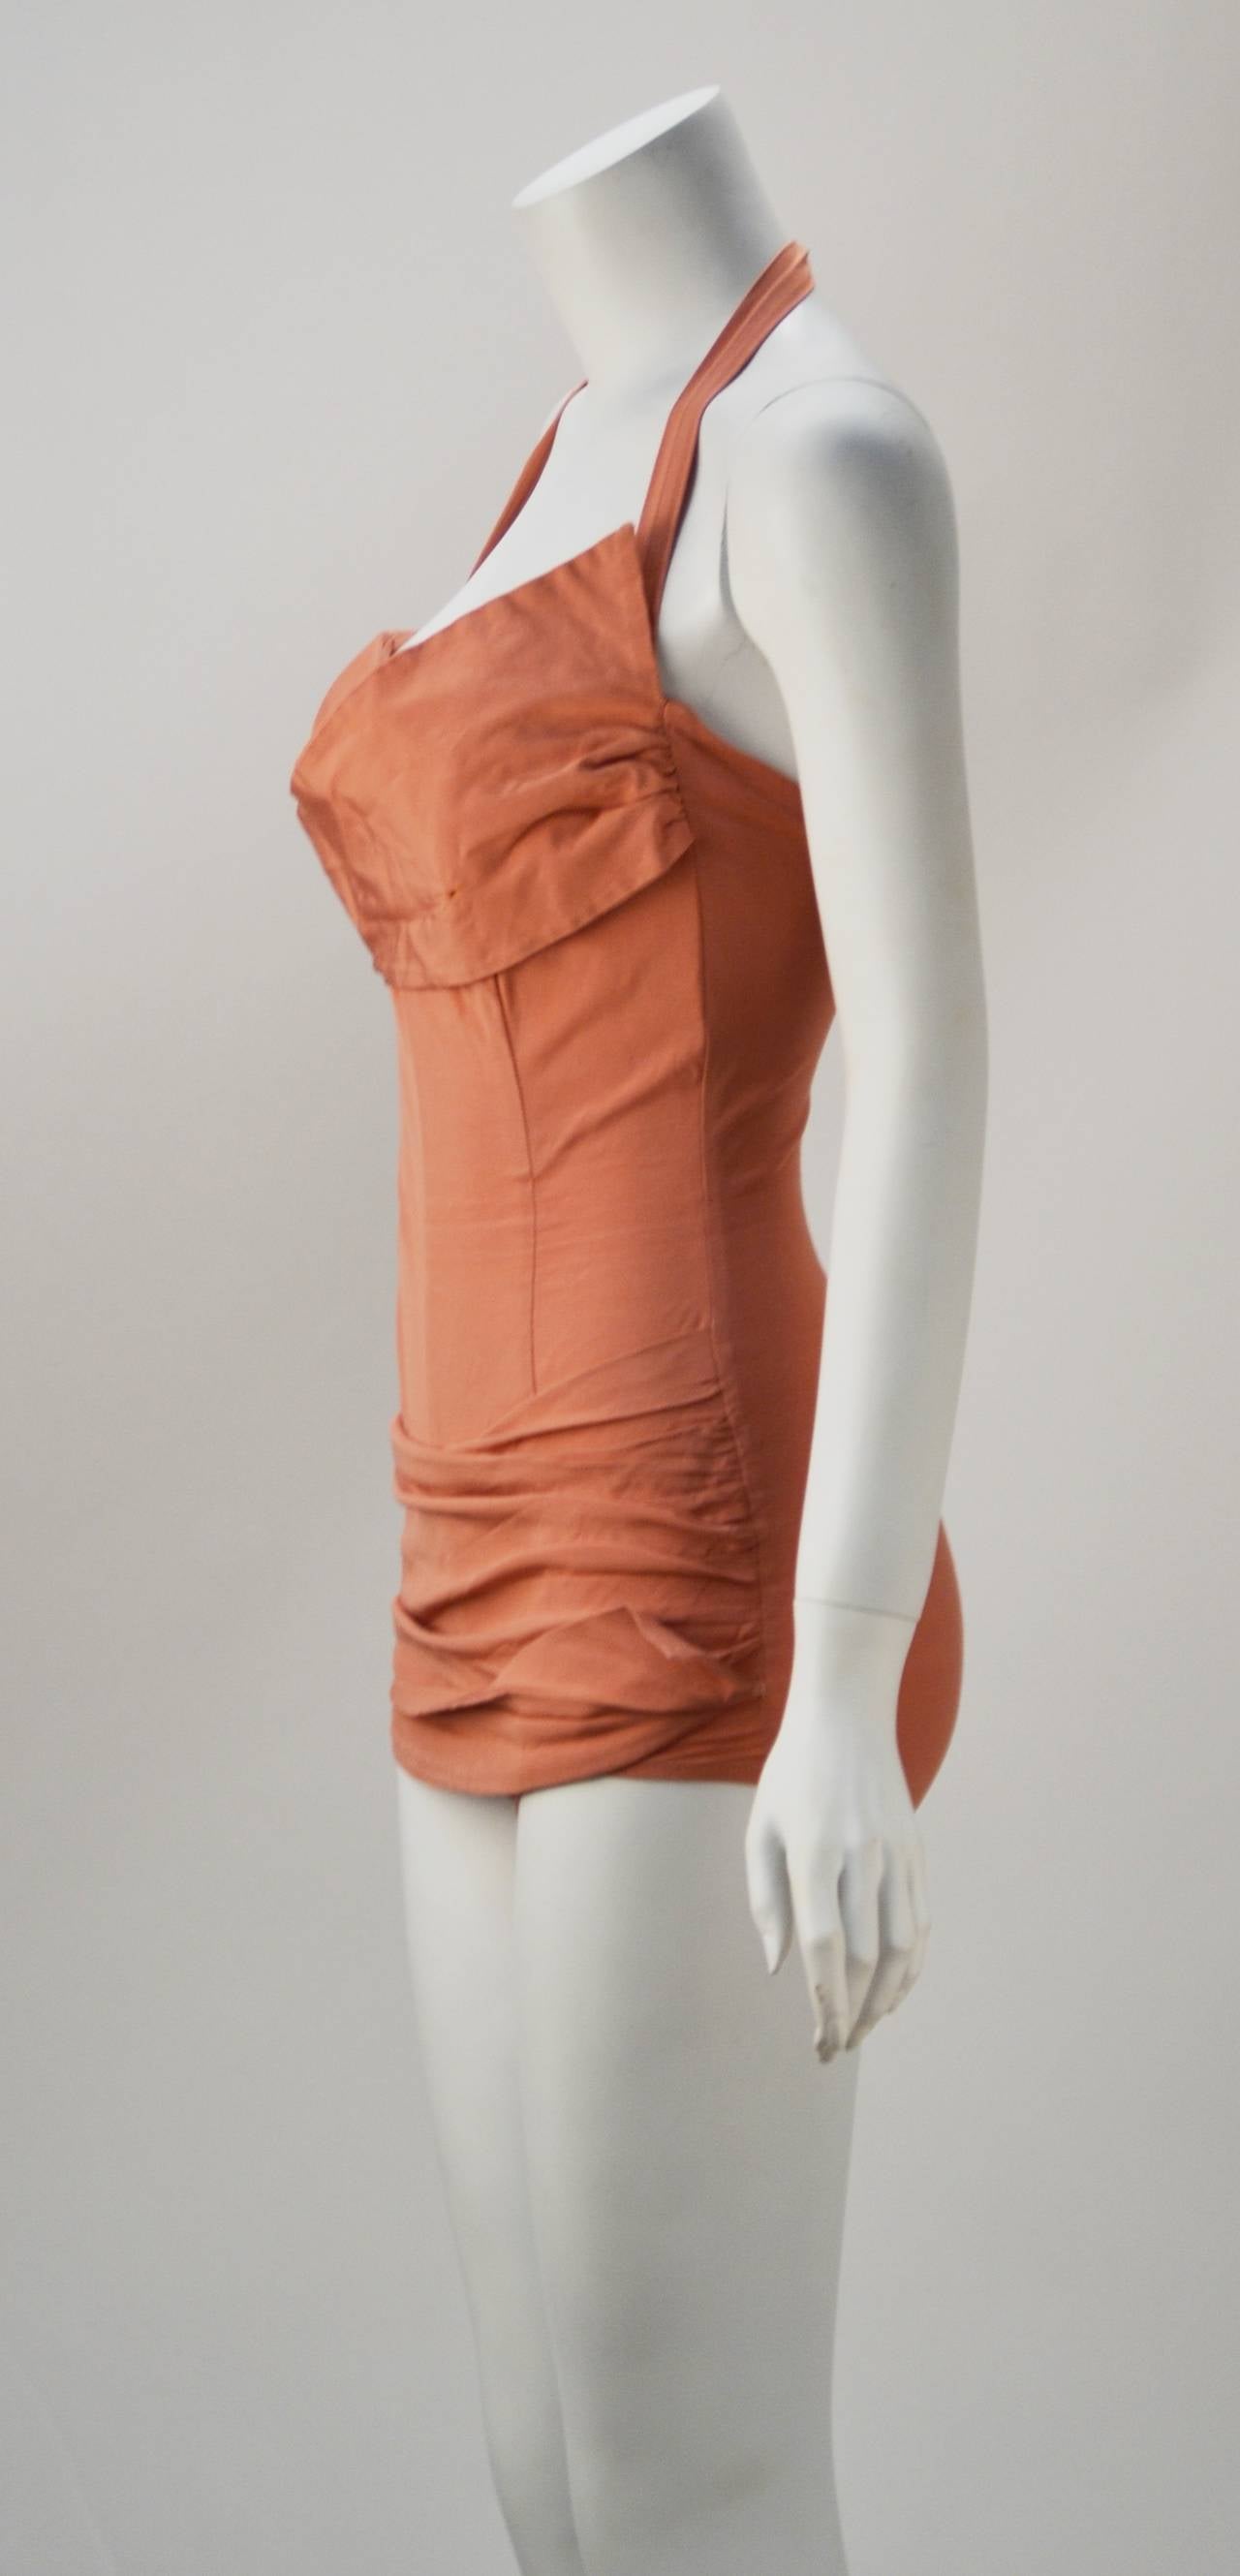 Fred Cole was known for his sexy Hollywood swimsuit designs. In the mid 50's he made swimsuits for Dior. This coral swim suit has an interesting Asymmetrical bust line and ruching across the hips along with lite boning along the princess seams. It